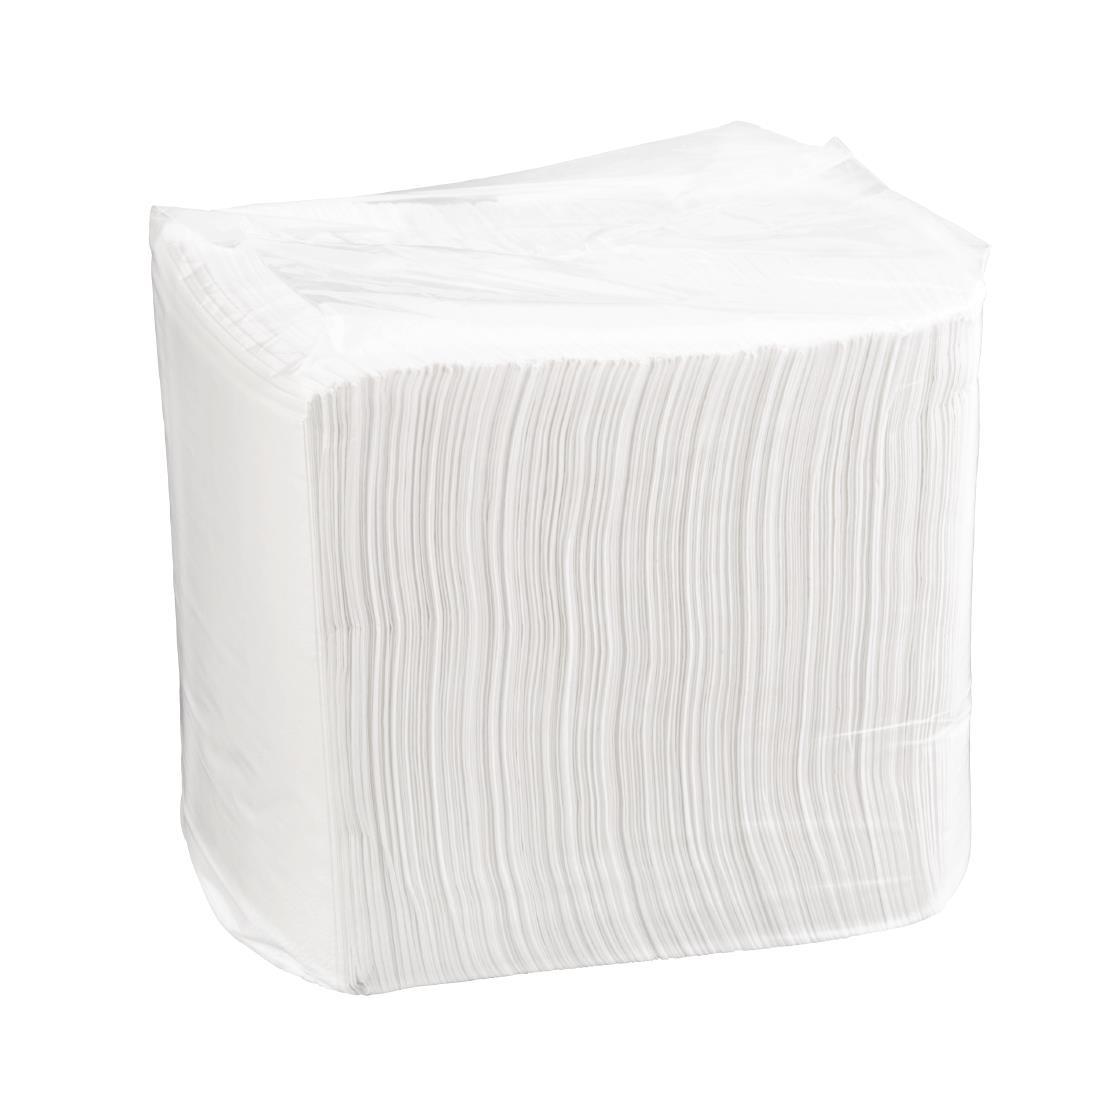 Fiesta Recyclable Lunch Napkin White 30x30cm 2ply 1/4 Fold (Pack of 250) - CM563  - 7